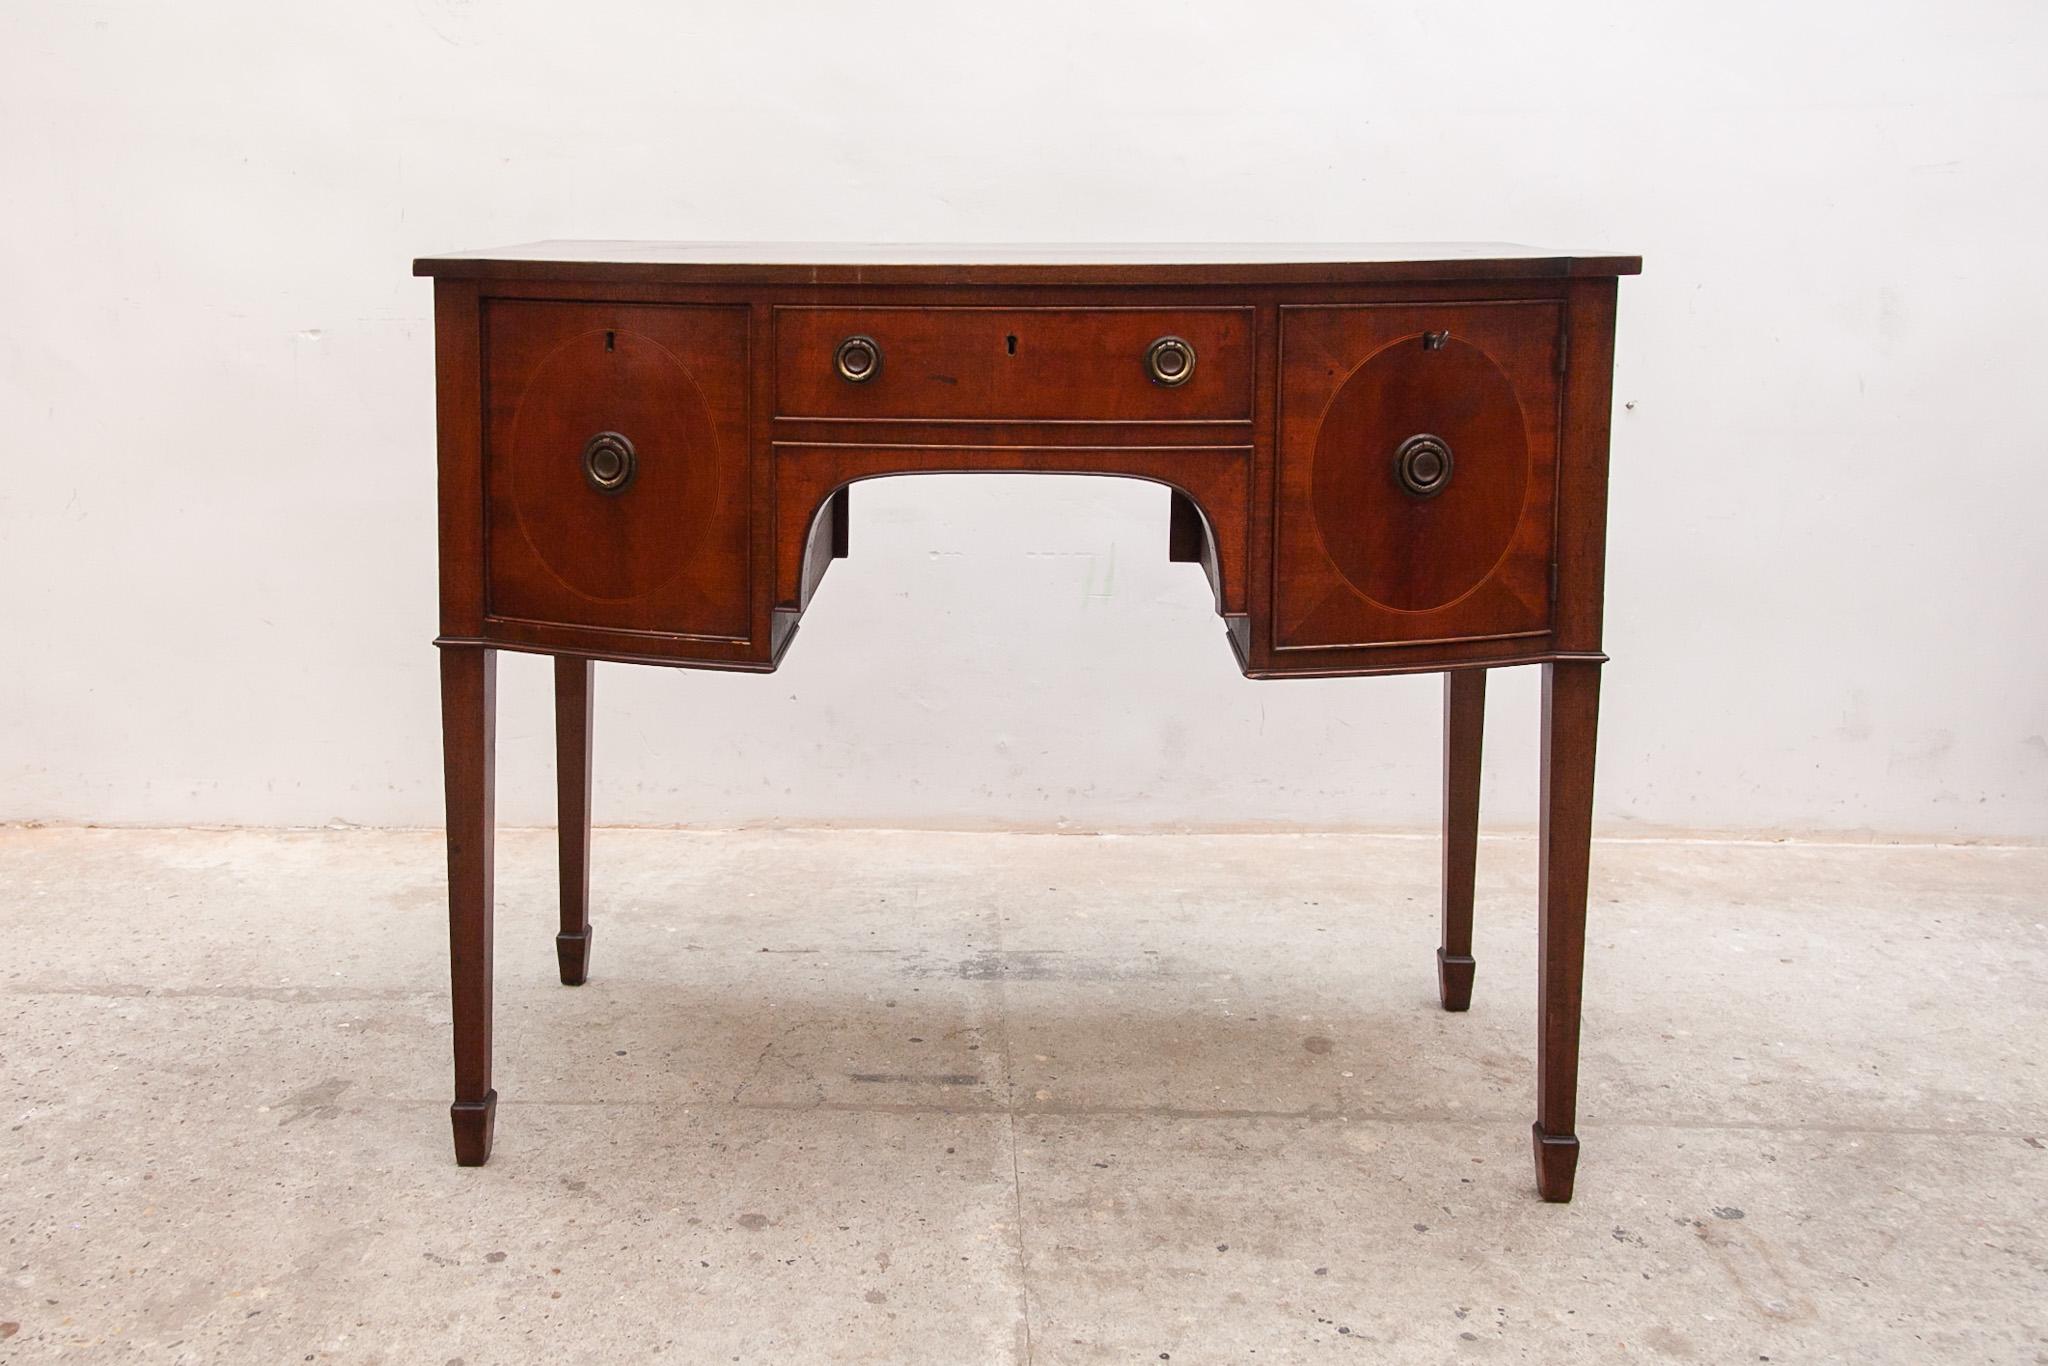 This small Lady desk was crafted in Austria. The top is wonderfully smooth and displays the woodgrain beautifully in walnut veneer. The apron houses three drawers, all with quality brass banding inset into the paneling. The two side drawers and